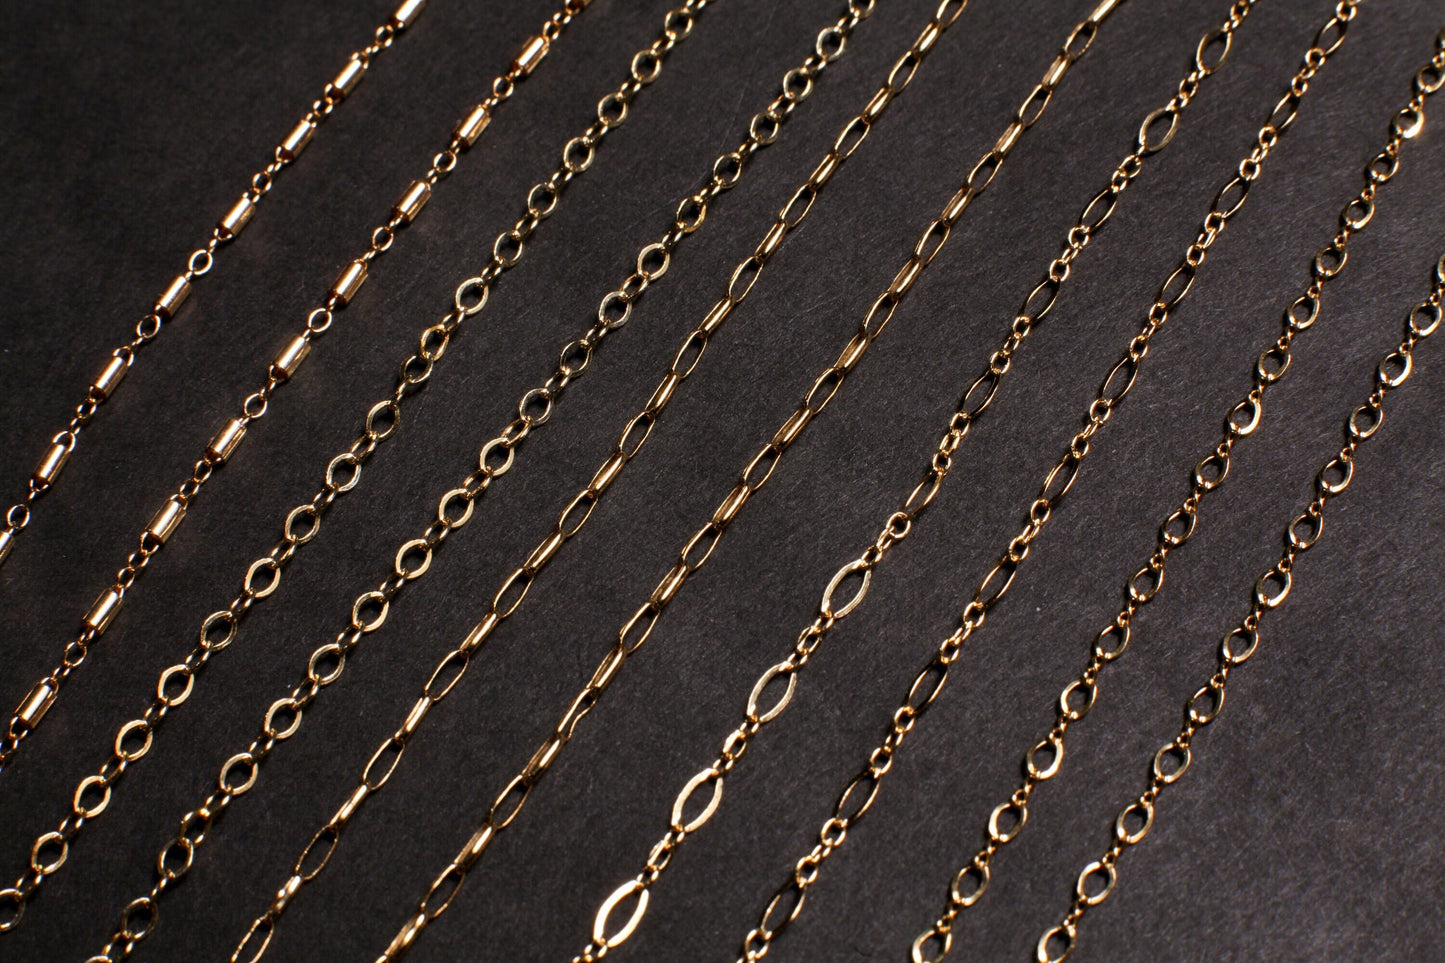 14K Gold Filled Finished Chain with Clasp, Made in Italy, High Quality, 14/20 Gold Filled Choker Layering Necklace. Available in 14&quot;- 36&quot;